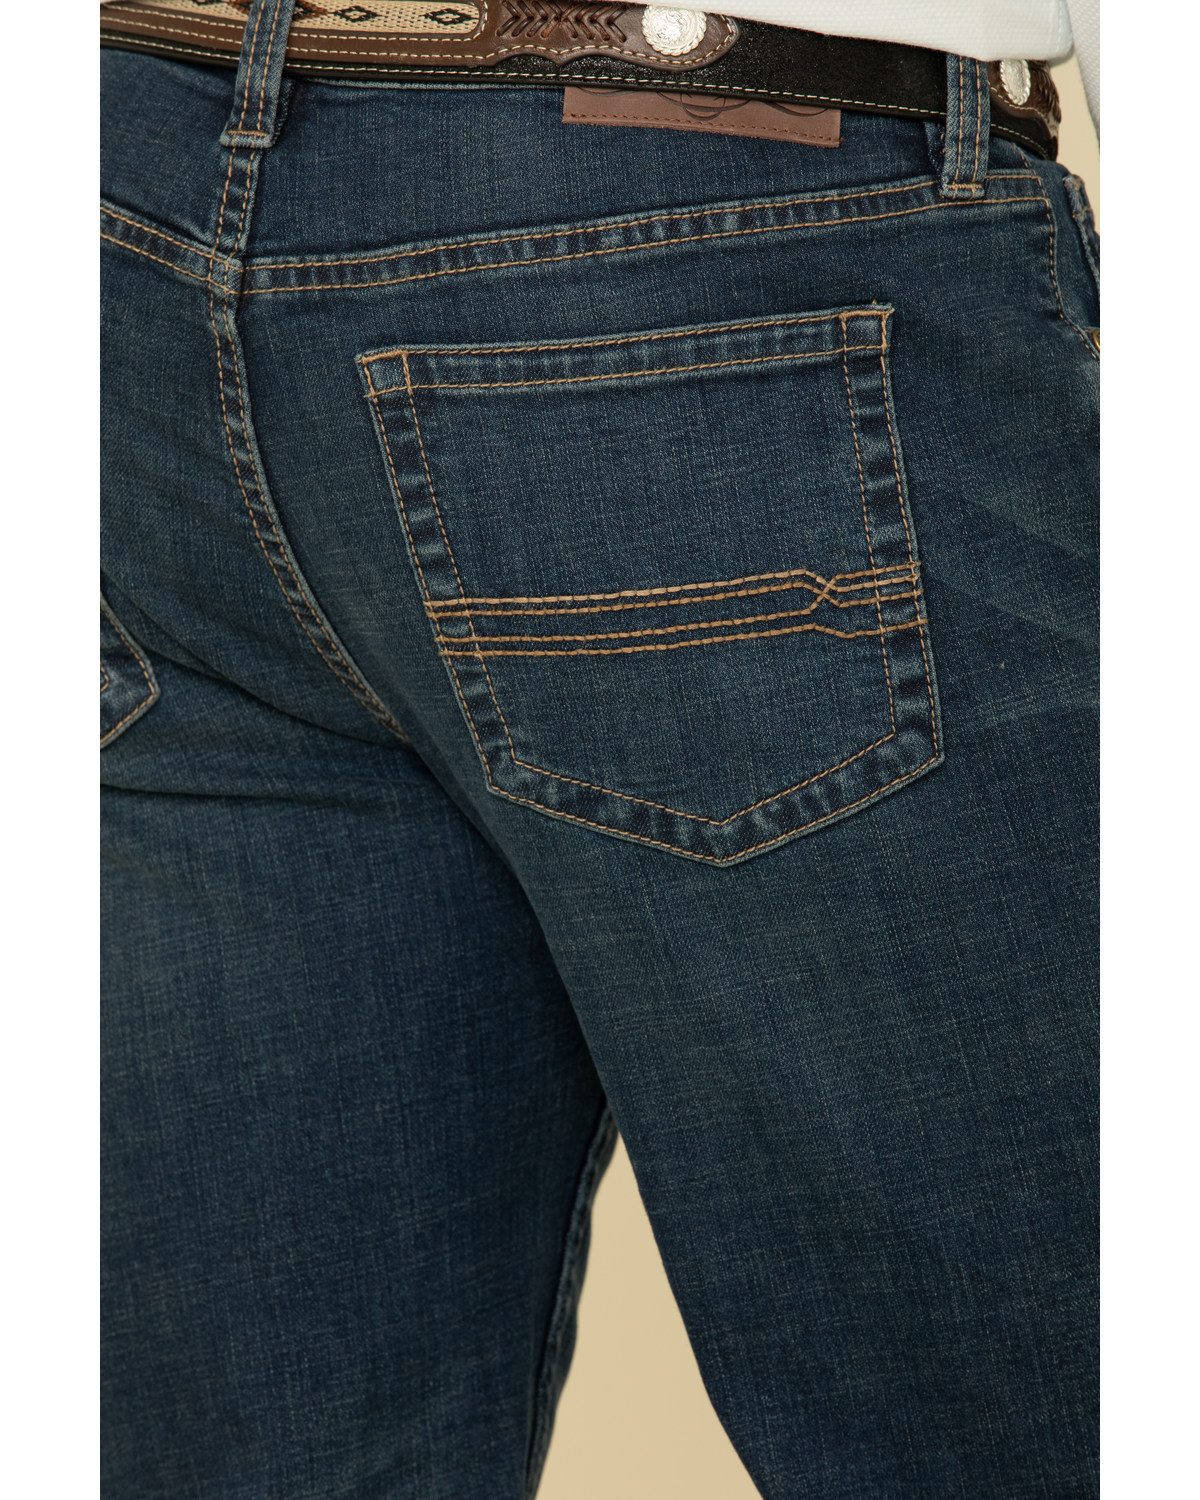 Cody James Men's Saguaro Dark Stretch Relaxed Straight Jeans | Boot Barn